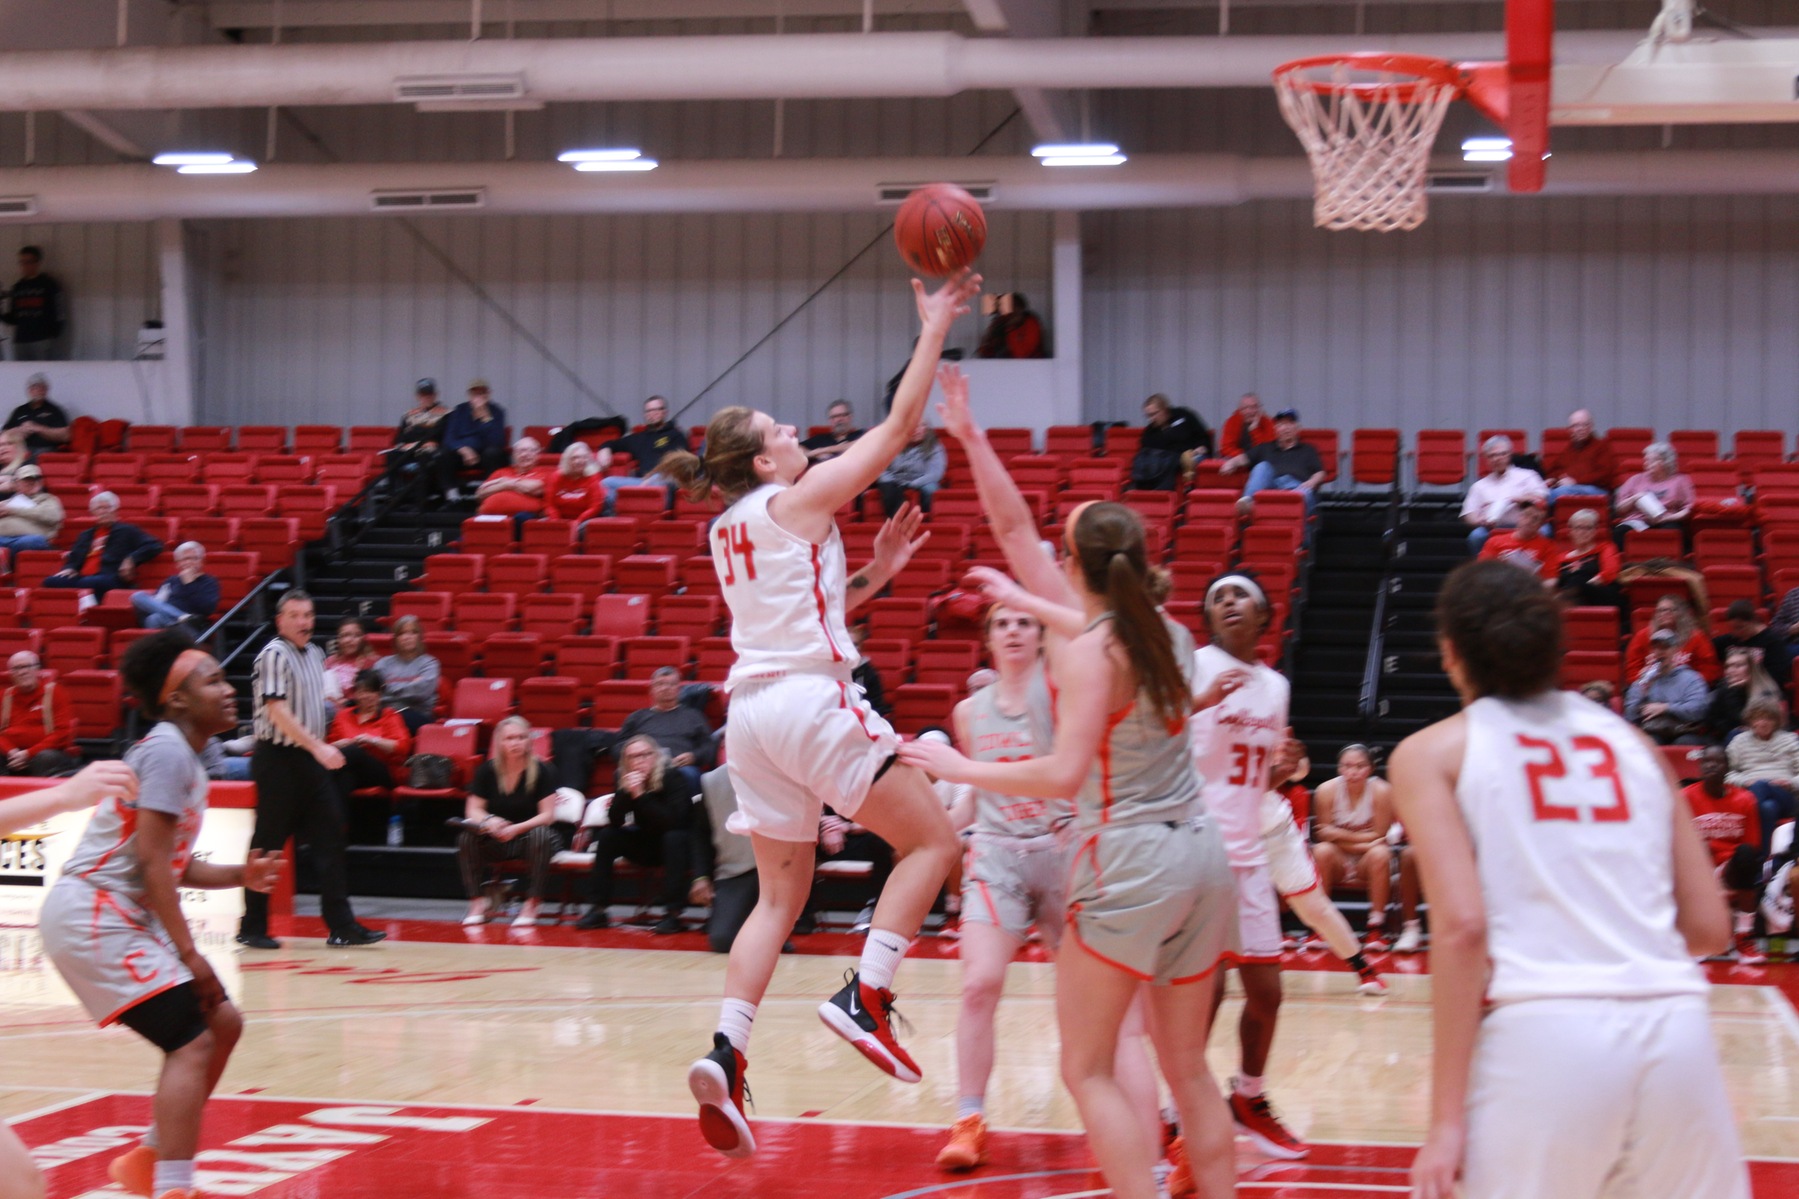 Furious Fourth Period Propels Red Raven Women's Basketball Over Cowley, 48-46